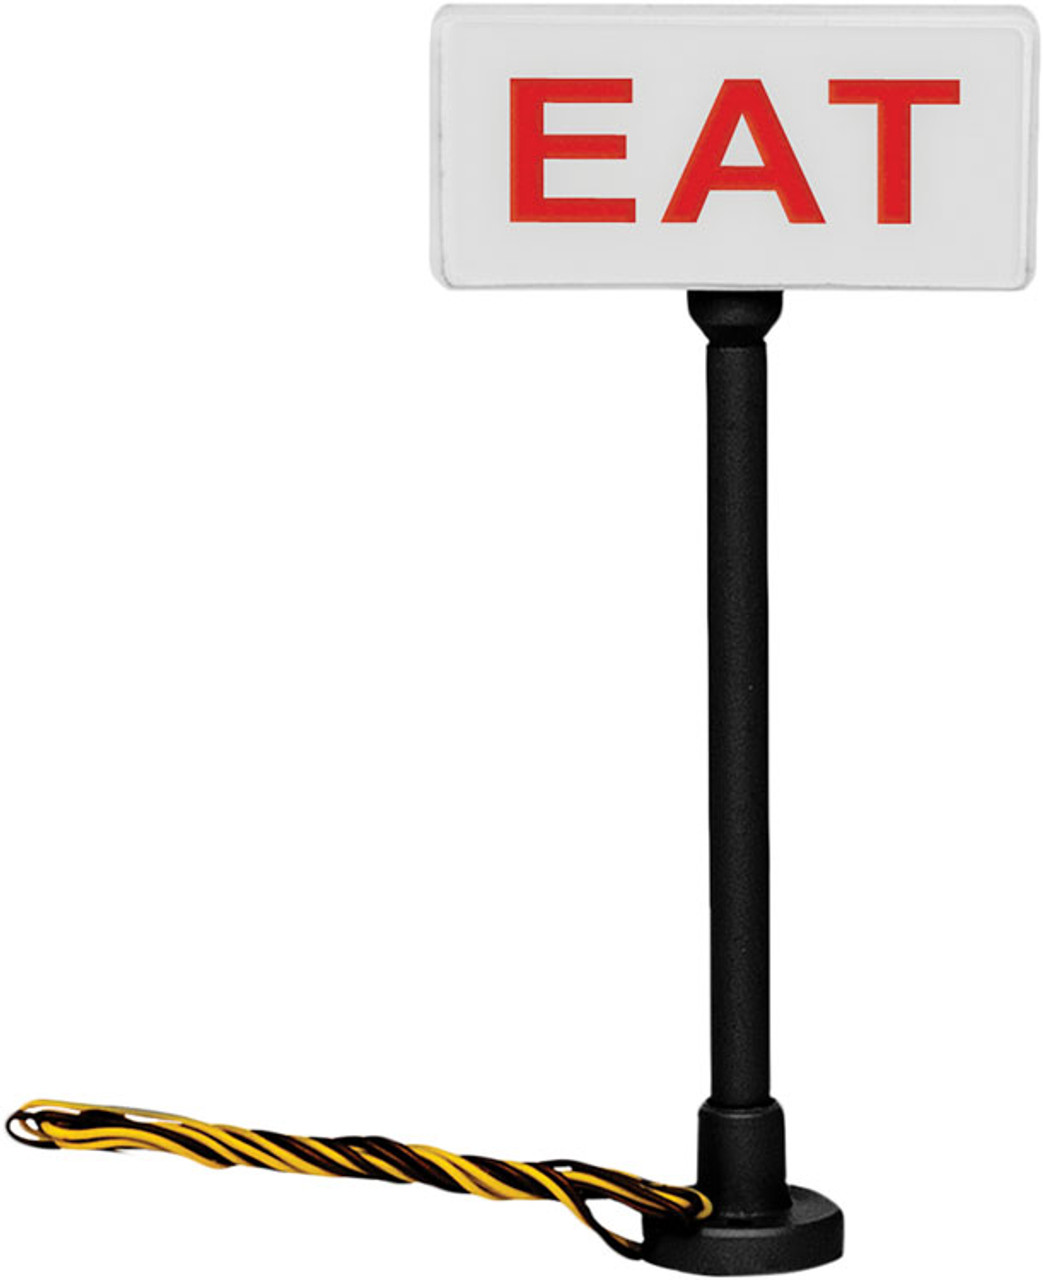 "EAT" Lighted Signs 2-Pack